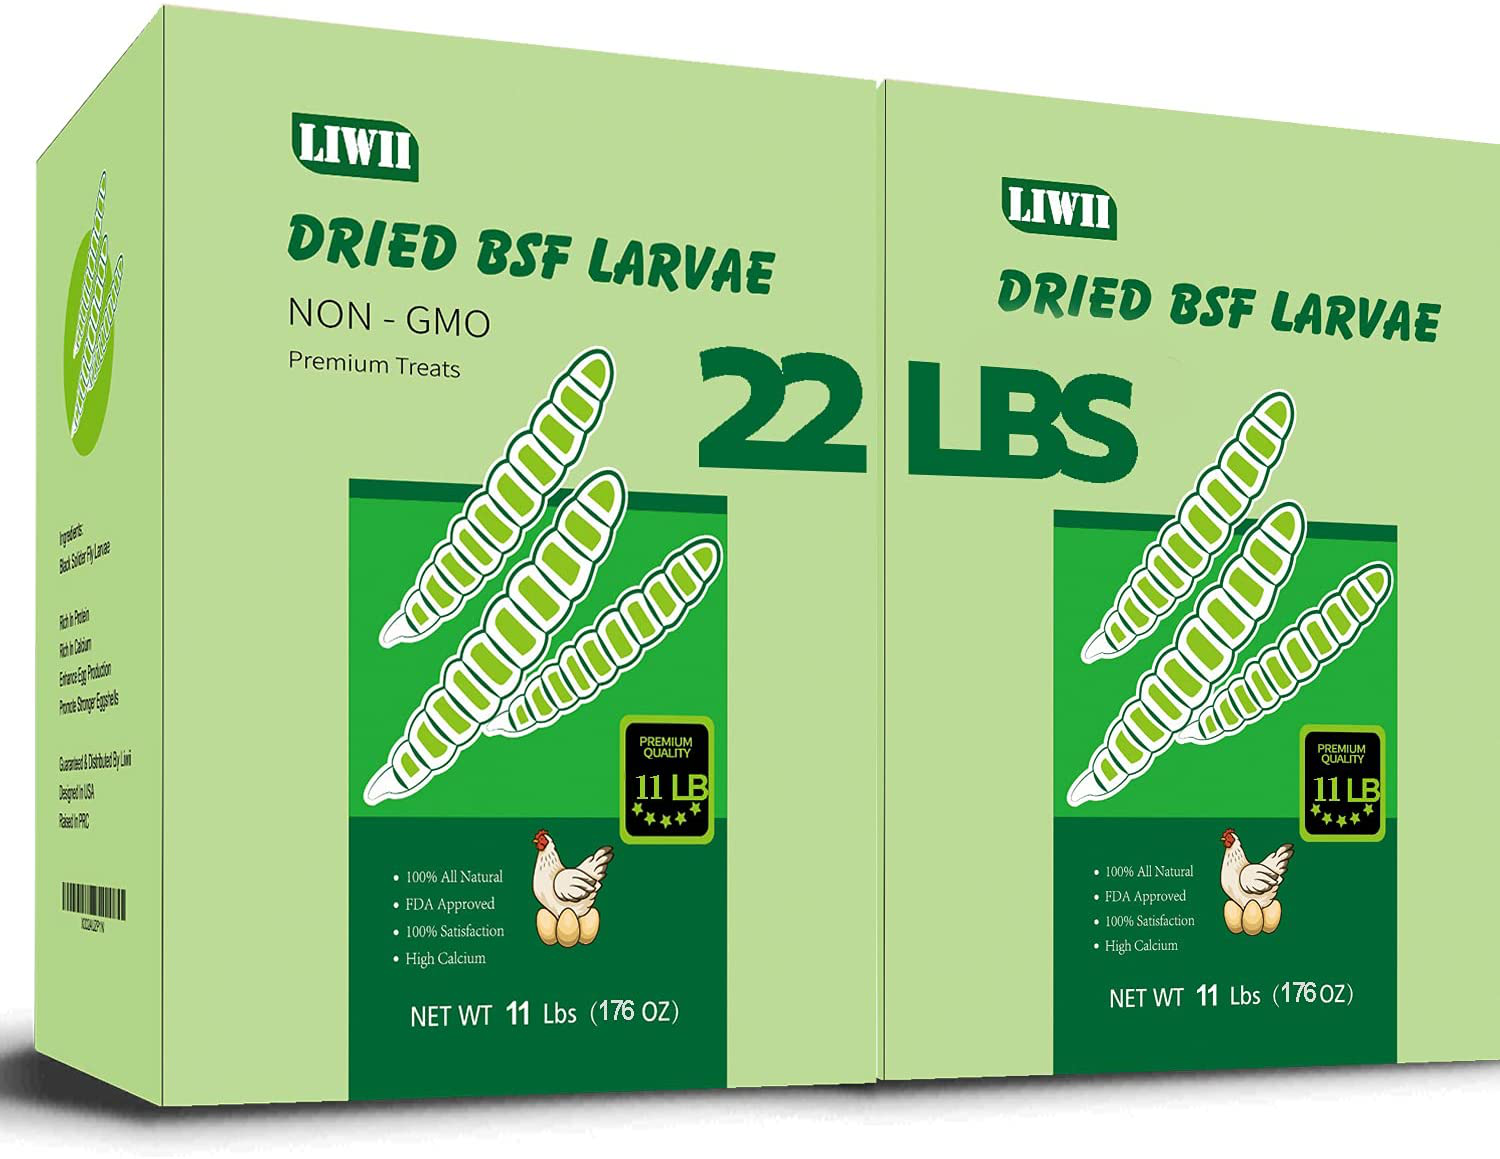 Dried Black Soldier Fly Larva-2 Pack of 11 Lbs-100% Natural BSF Larvae-85Xmore Calcium than Mealworms - High Calcium Treats for Chickens, Birds, Reptiles, Hedgehog, Geckos, Turtles